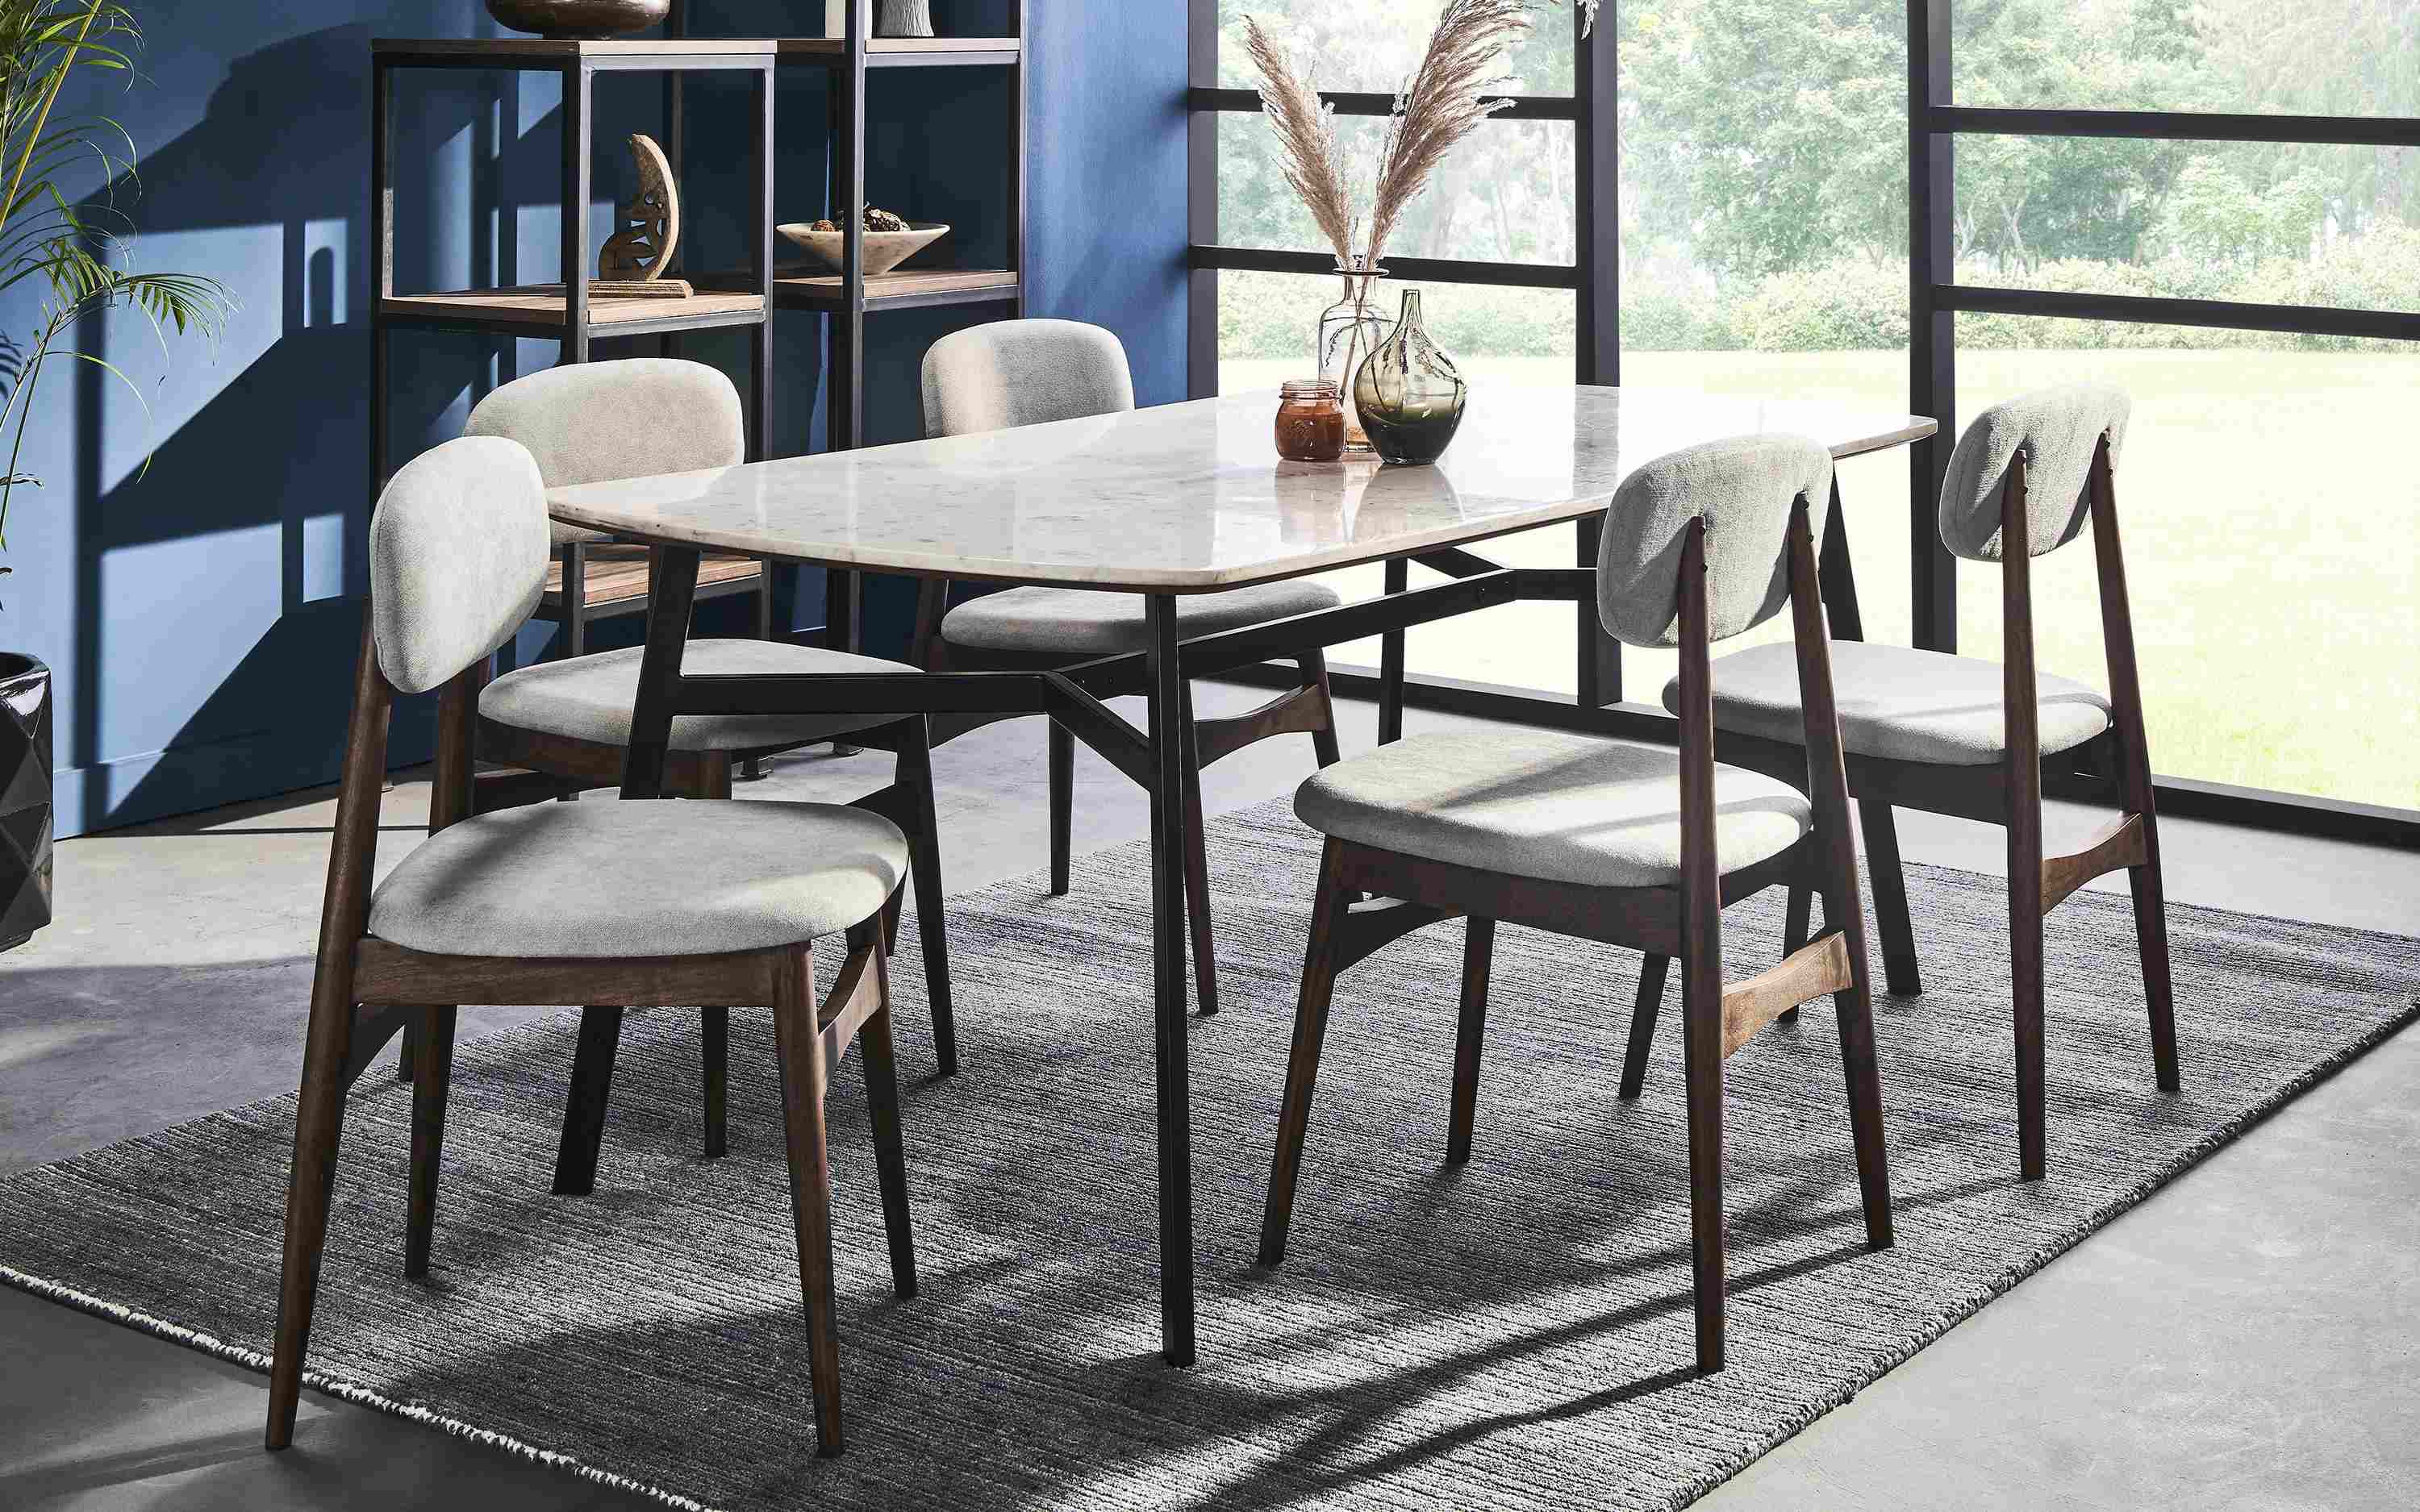 Acme Dining Table With 6 Chairs - Rugs: Softness Underfoot